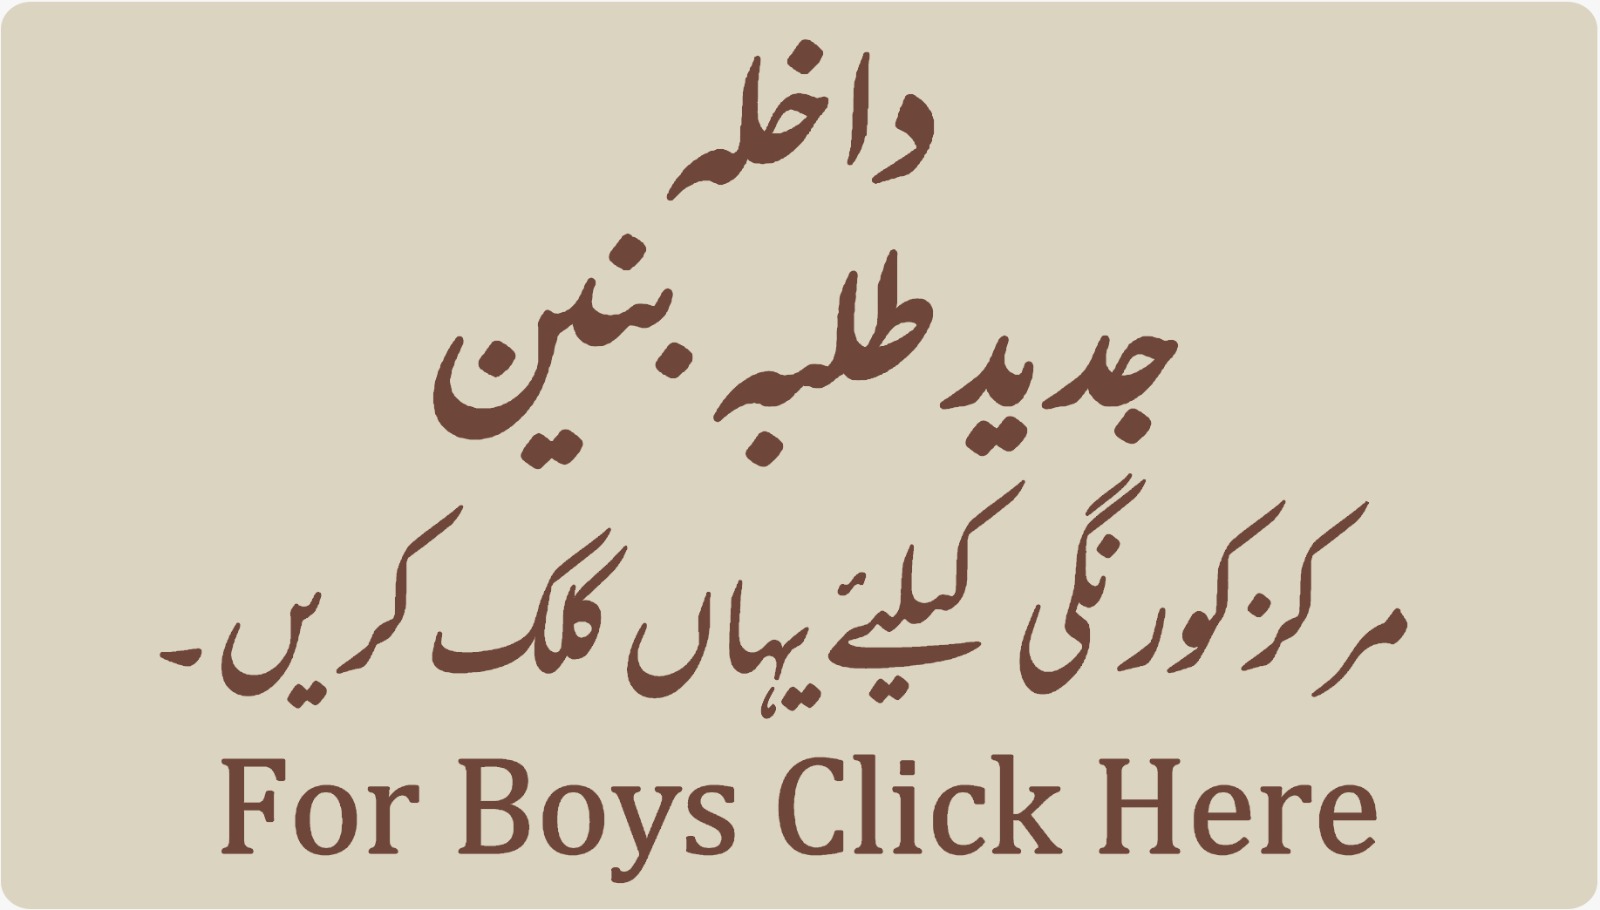 FOR BOYS CLICK HERE